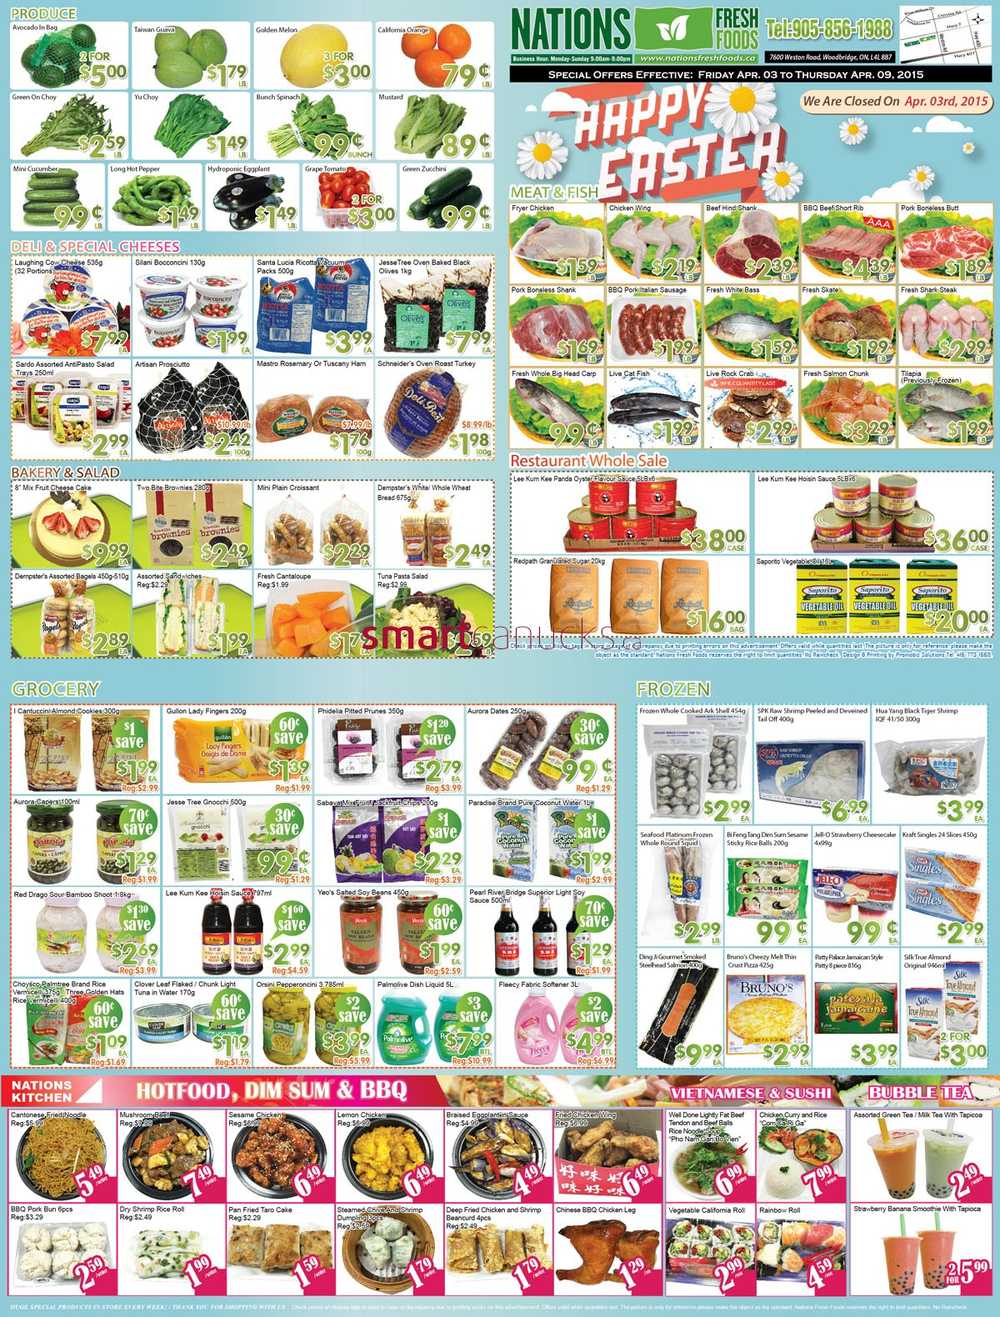 Nations Fresh Foods (Vaughan) Flyer April 3 to 9